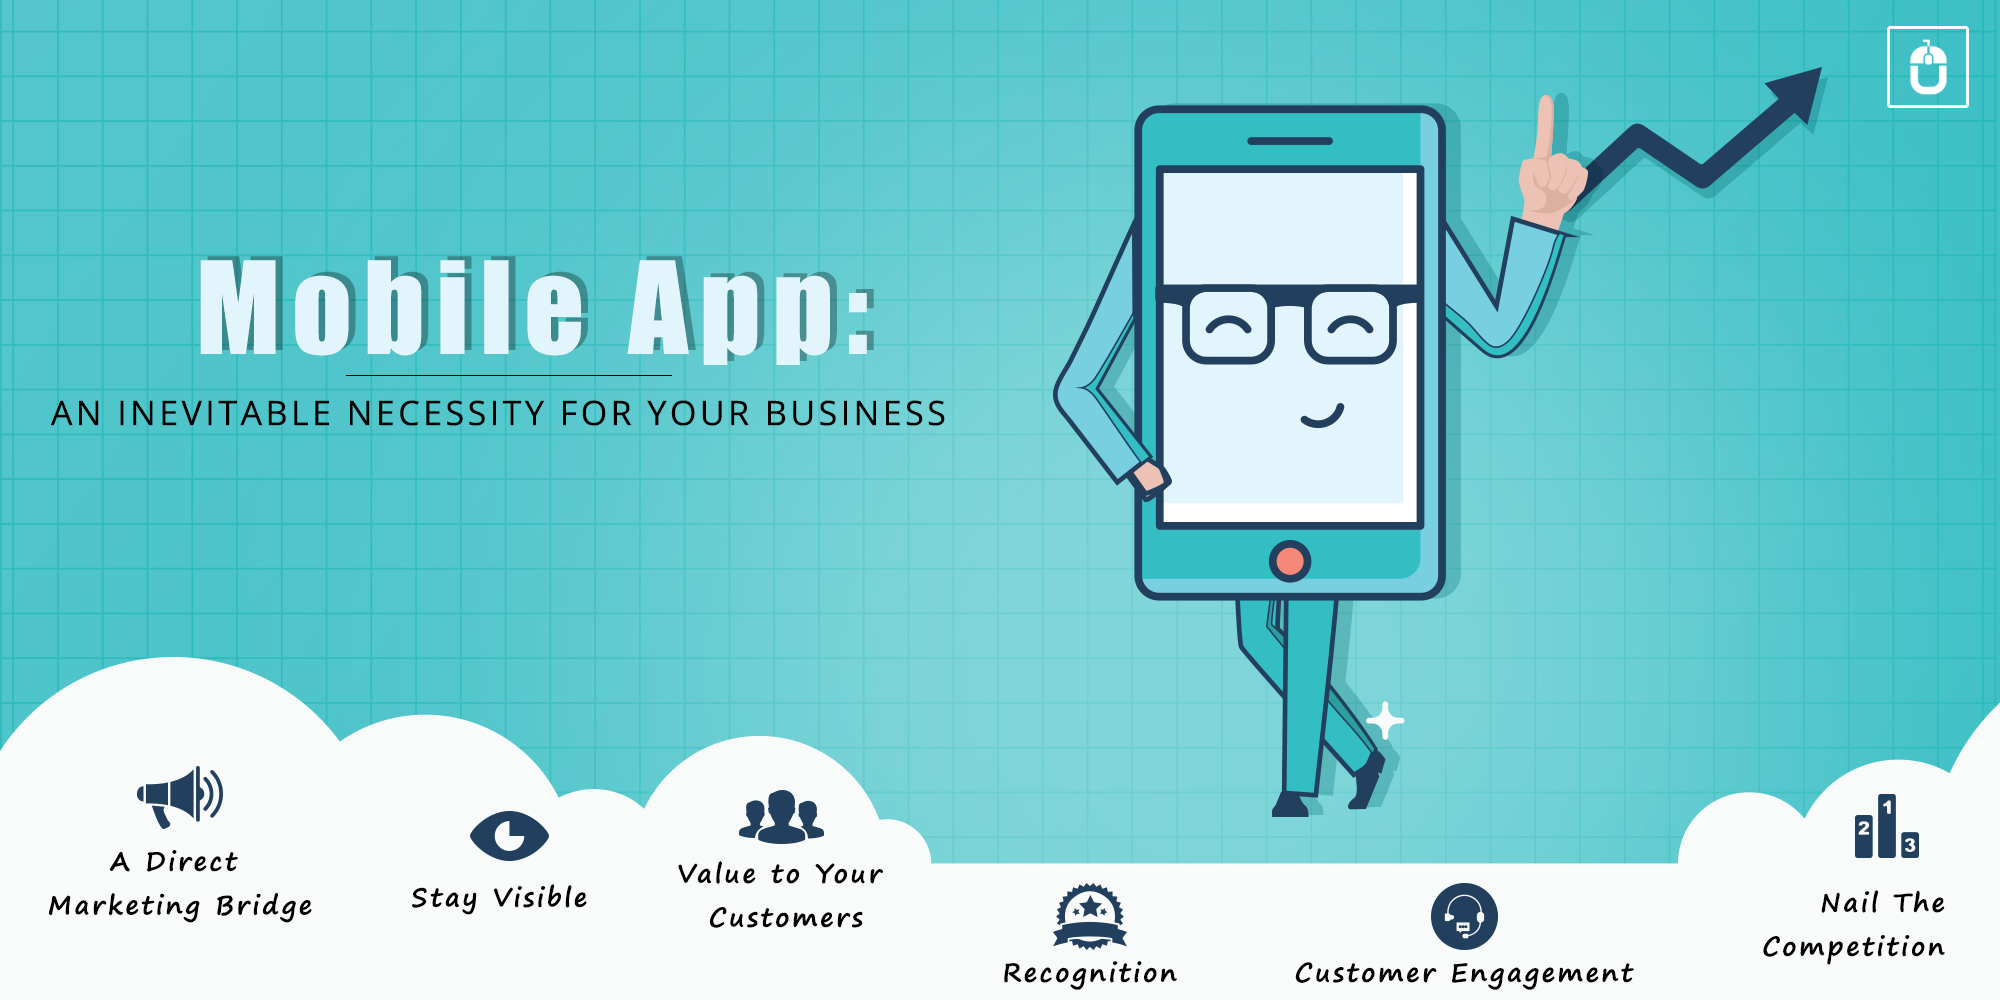 Mobile App: An Inevitable Necessity For Your Business